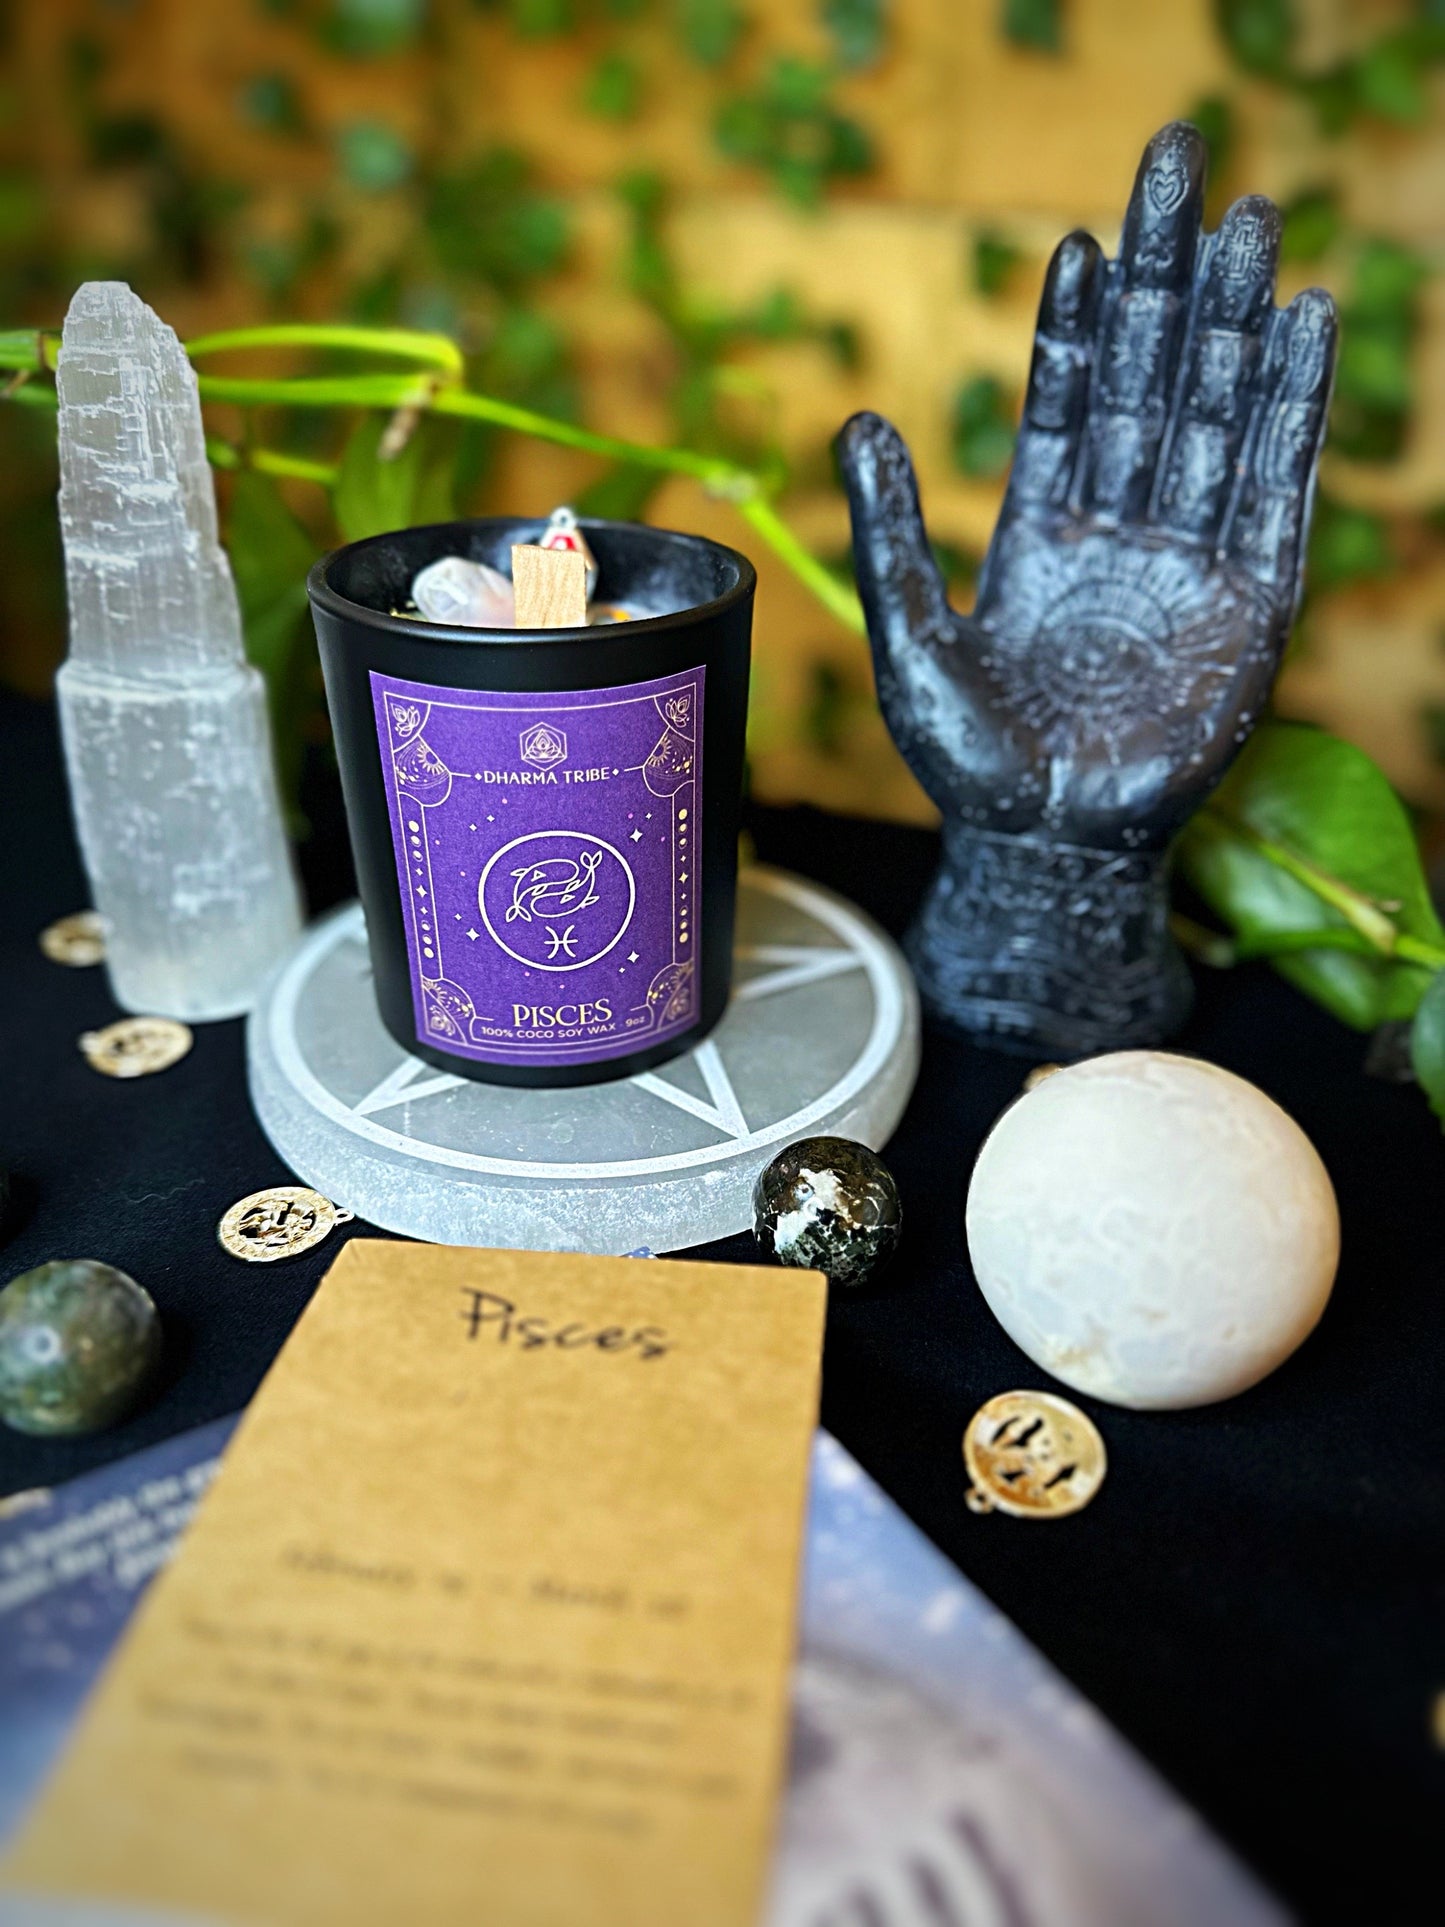 Pisces candle